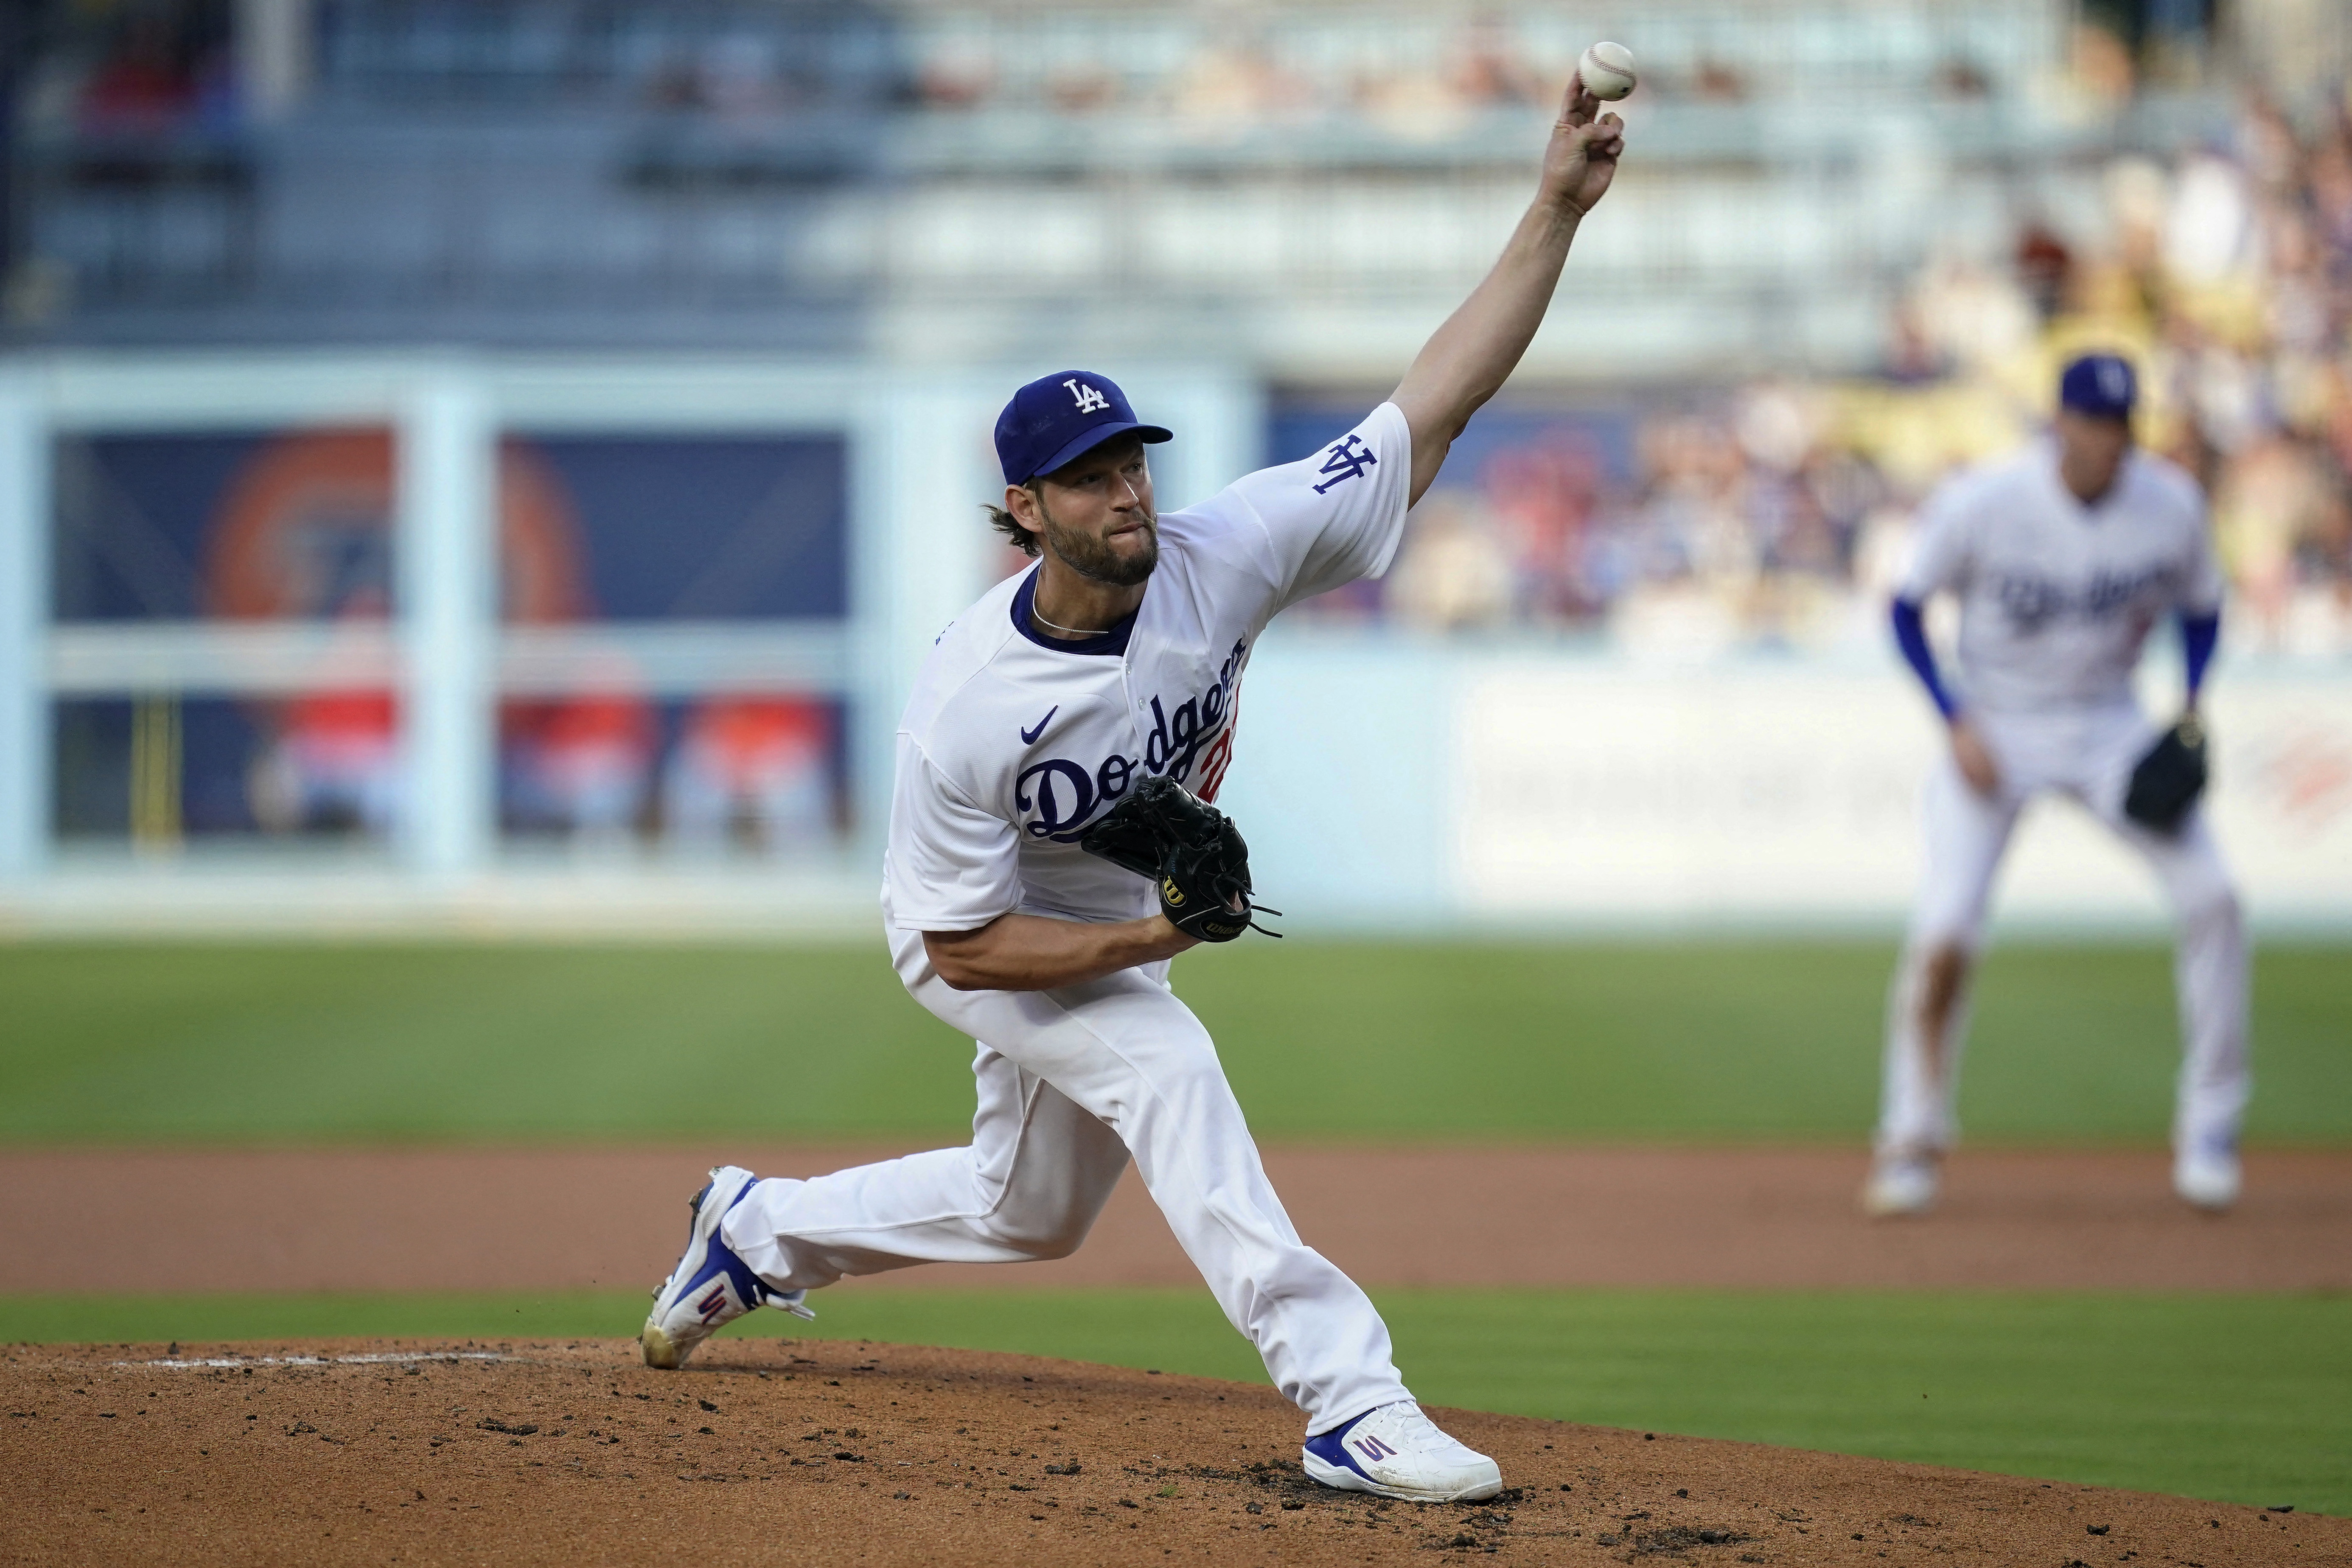 Kershaw strikes out 5 in return, Dodgers beat D-backs 5-1